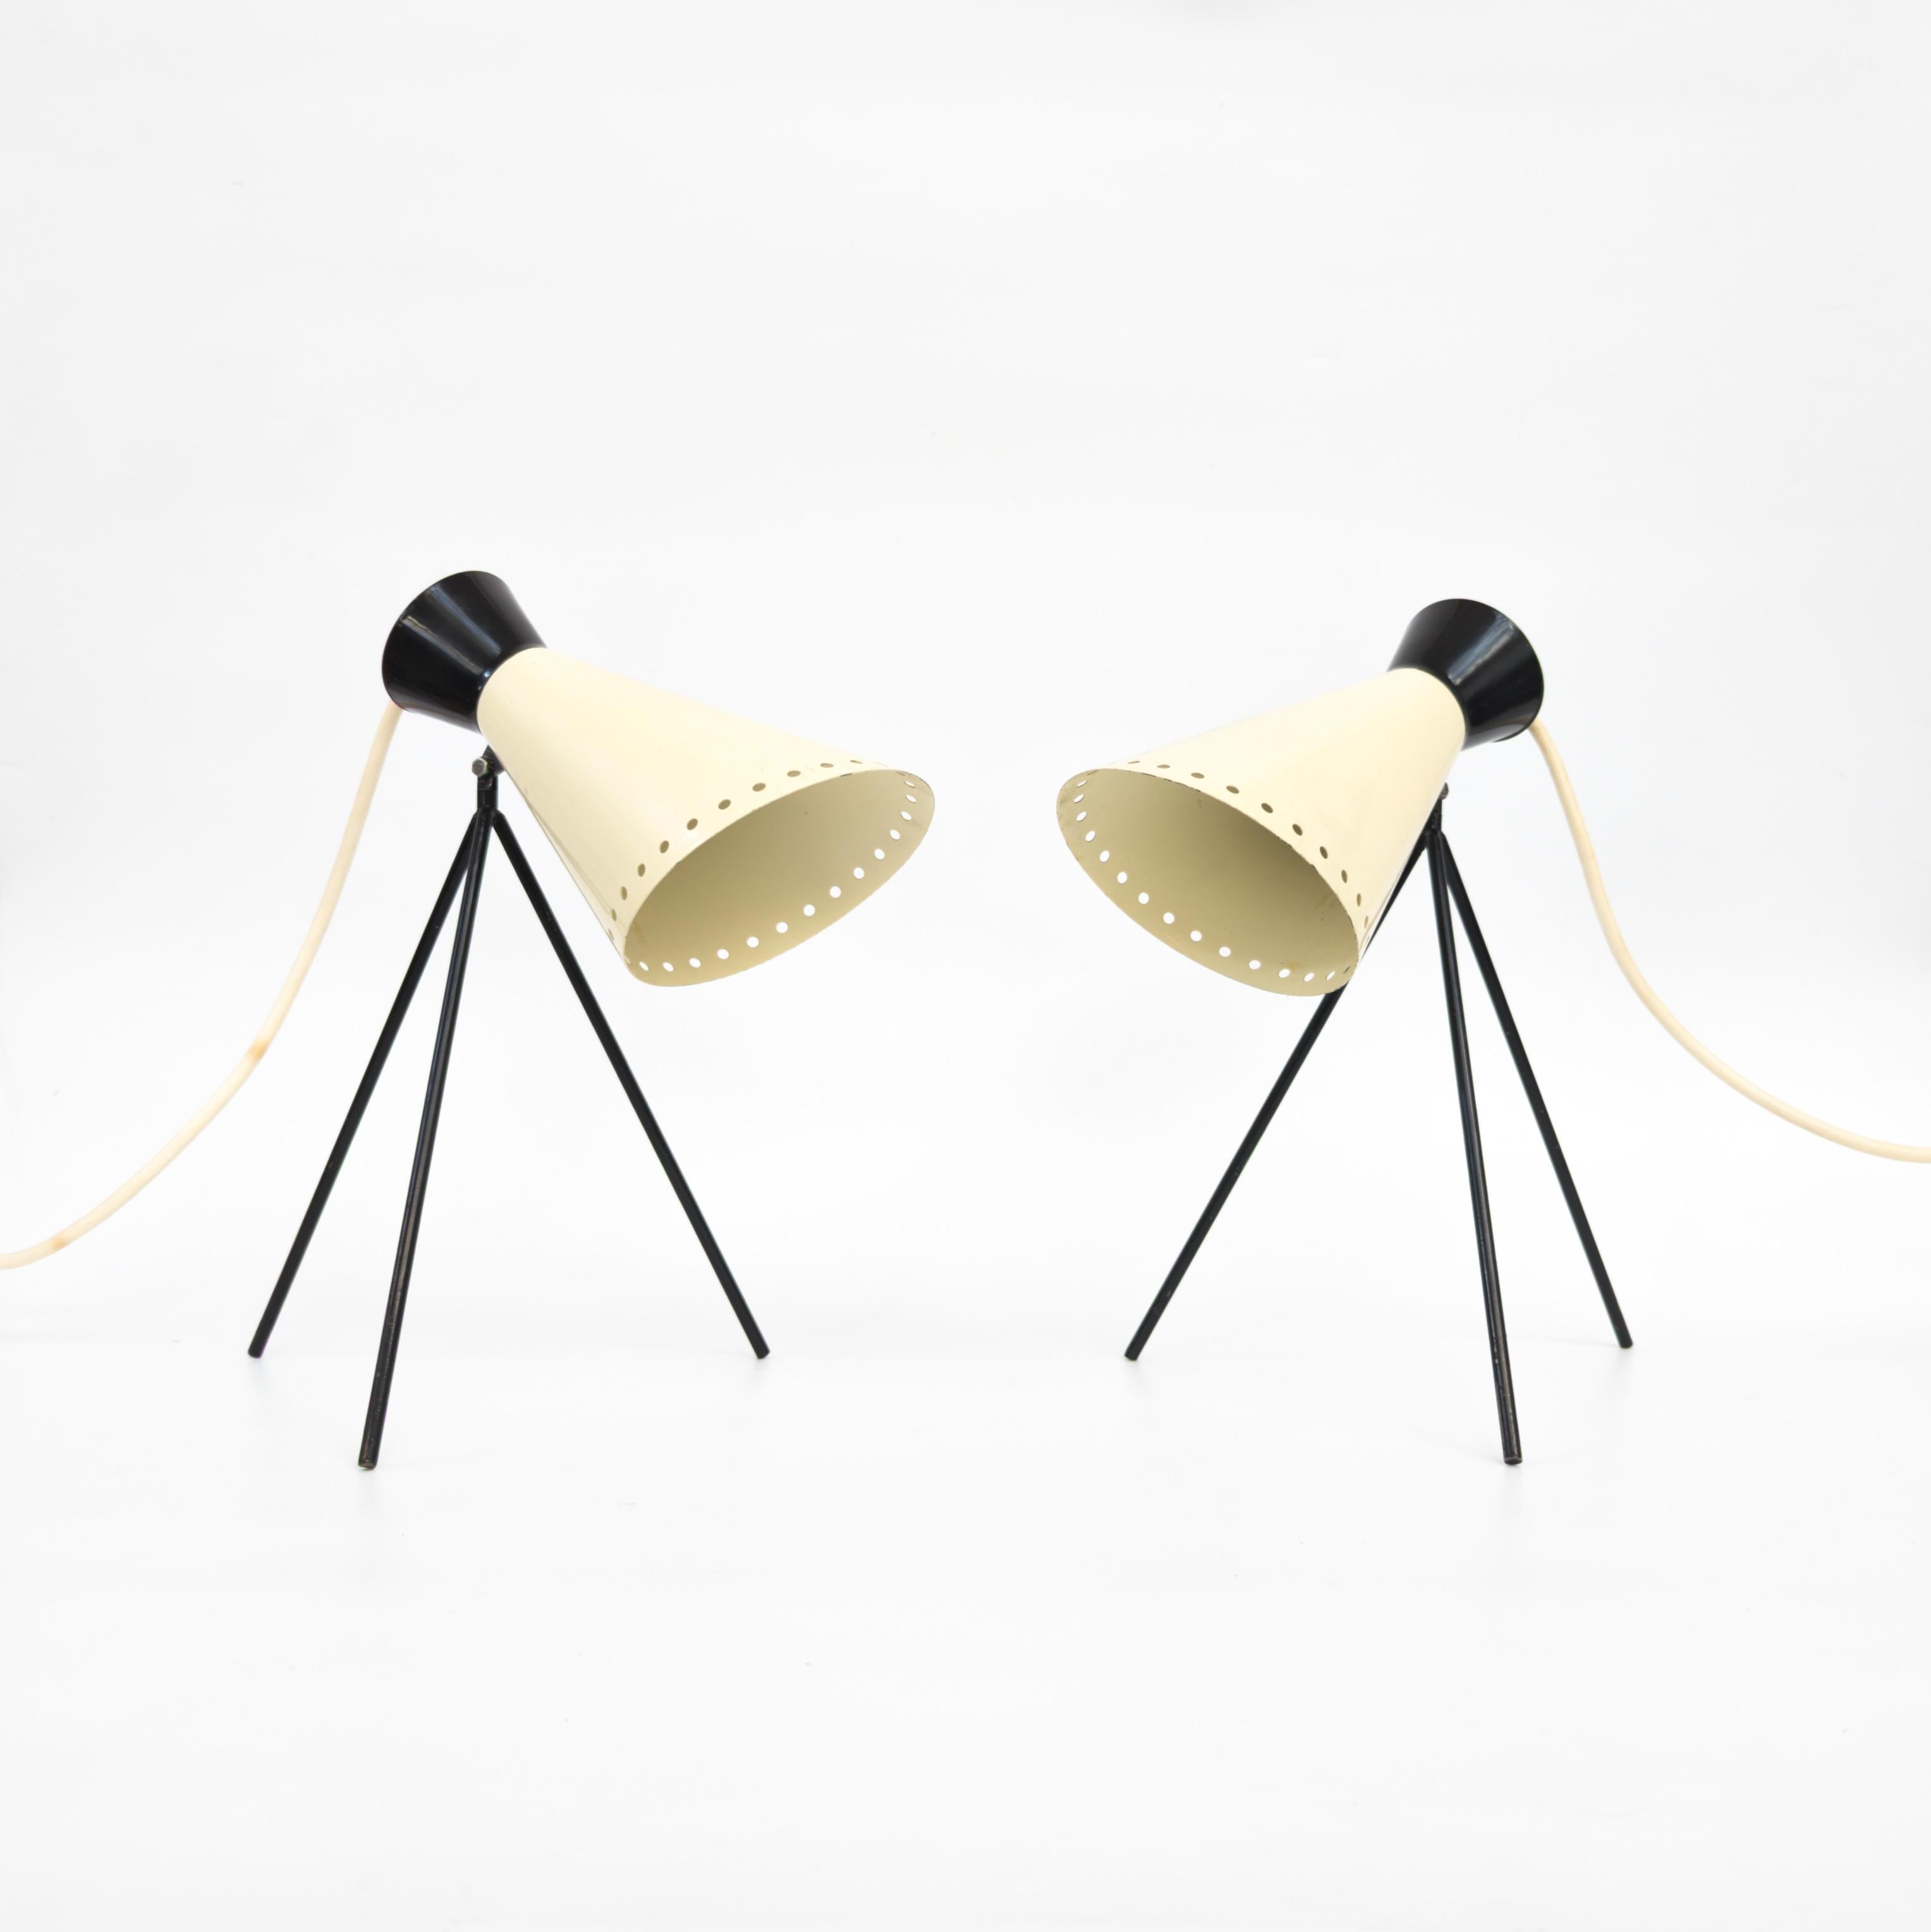 Fantastic mid-century modern tripod table lamps designed by Josef Hurka. Featuring a beautiful 1950s design in the classic beige and black color scheme. Crafted by Napako in Czech Republic, these lamps stand as an absolute design classic from the